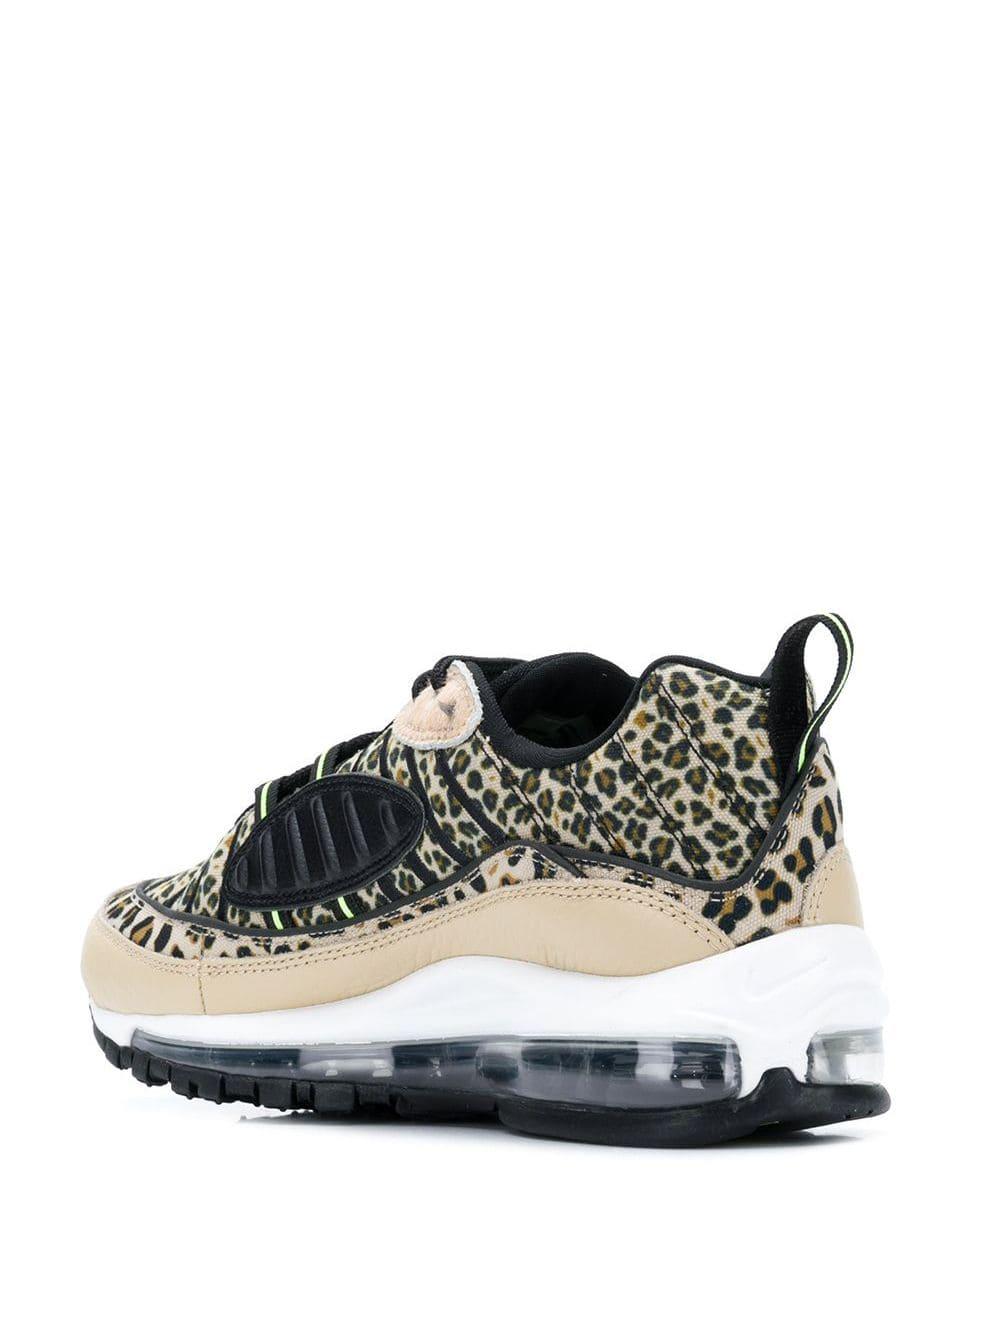 Nike Leather Air Max 98 Leopard Print Sneakers in Brown | Lyst